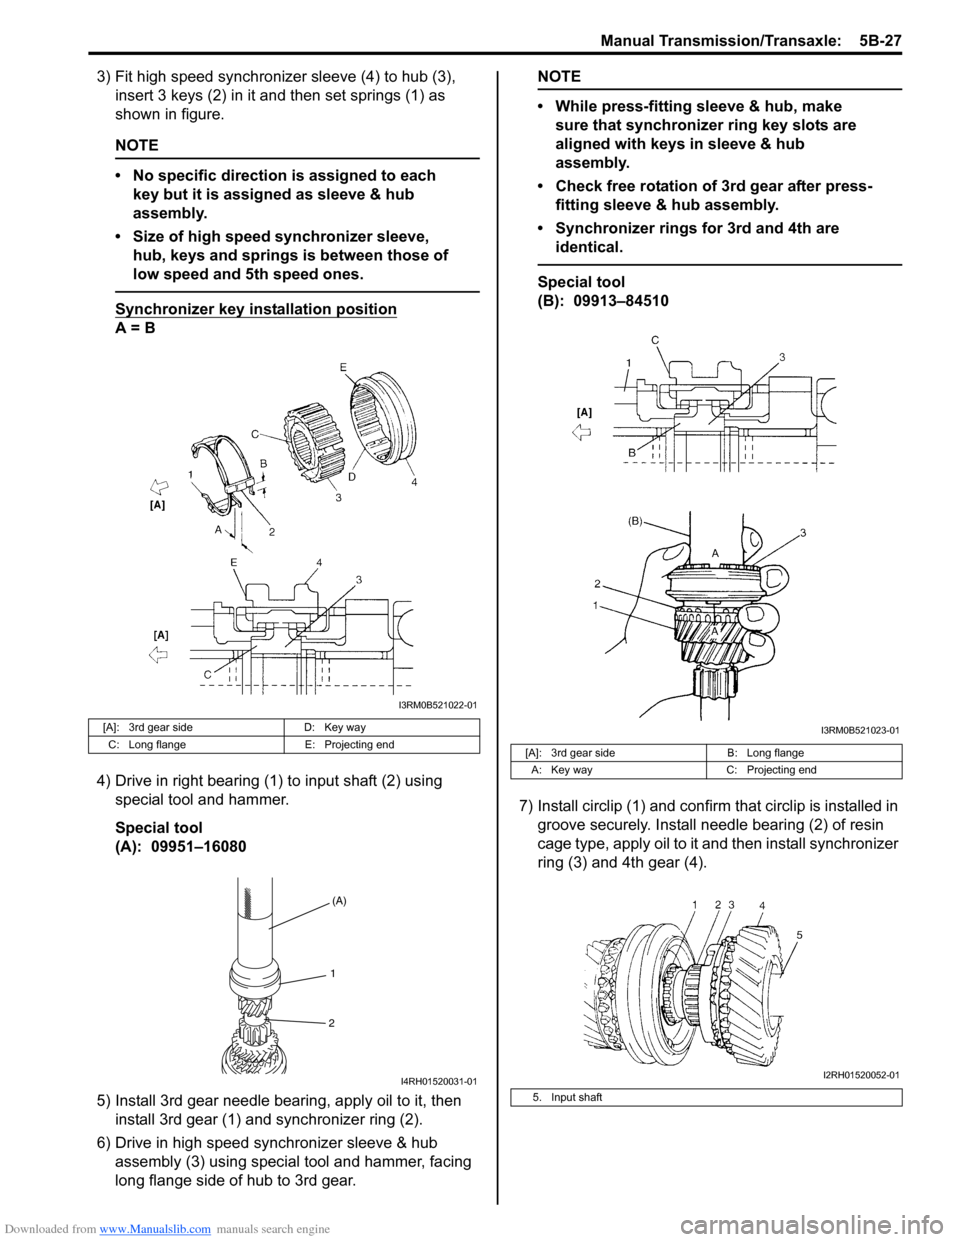 SUZUKI SWIFT 2008 2.G Service Workshop Manual Downloaded from www.Manualslib.com manuals search engine Manual Transmission/Transaxle:  5B-27
3) Fit high speed synchronizer sleeve (4) to hub (3), insert 3 keys (2) in it and then set springs (1) as